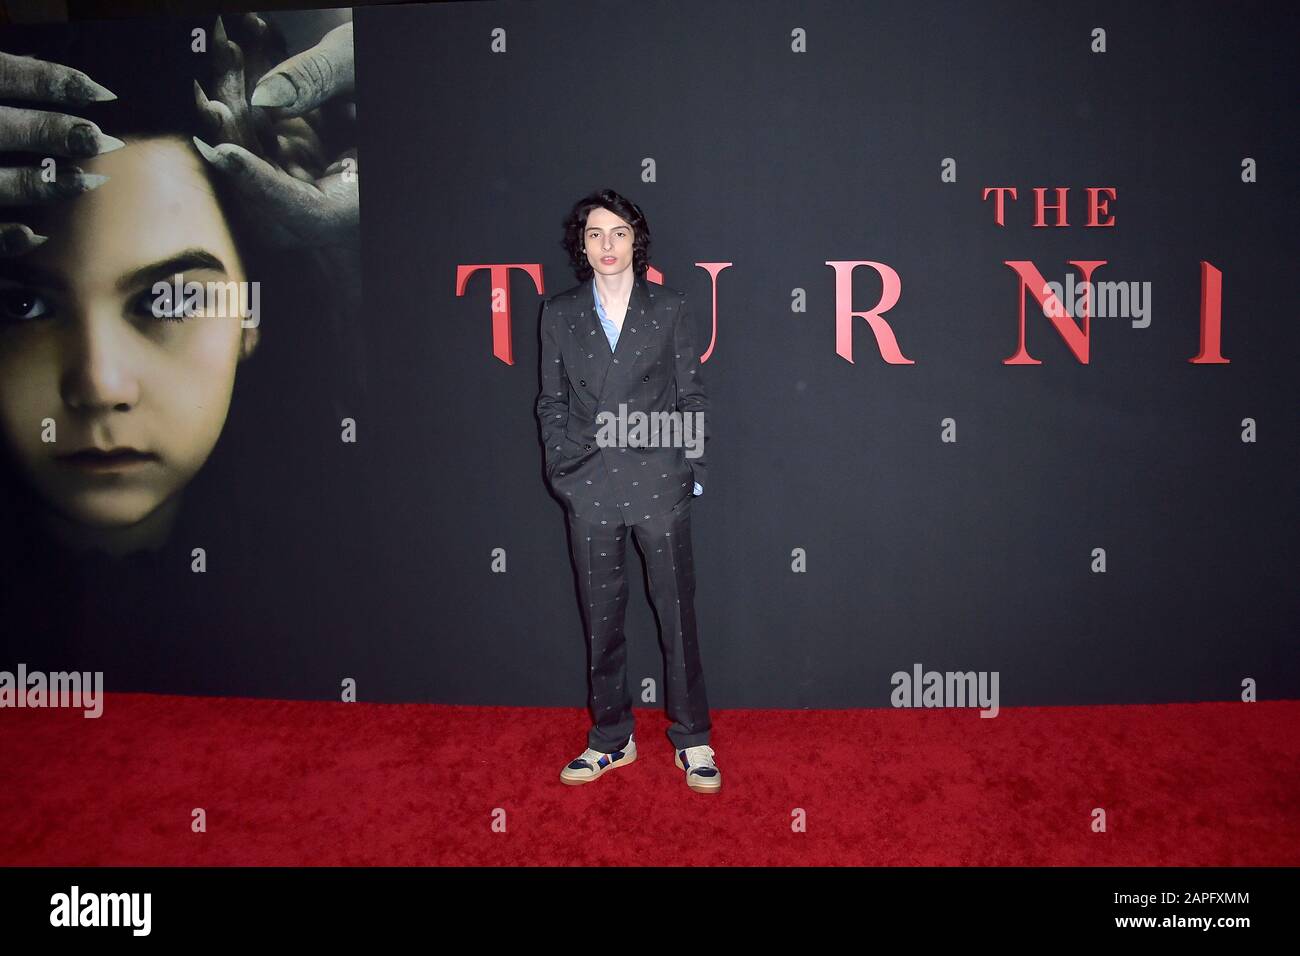 Finn Wolfhard at the premiere of the movie 'The Turning / Die Besessenen'  at the TCL Chinese Theater. Los Angeles, January 21, 2020 | usage worldwide  Stock Photo - Alamy